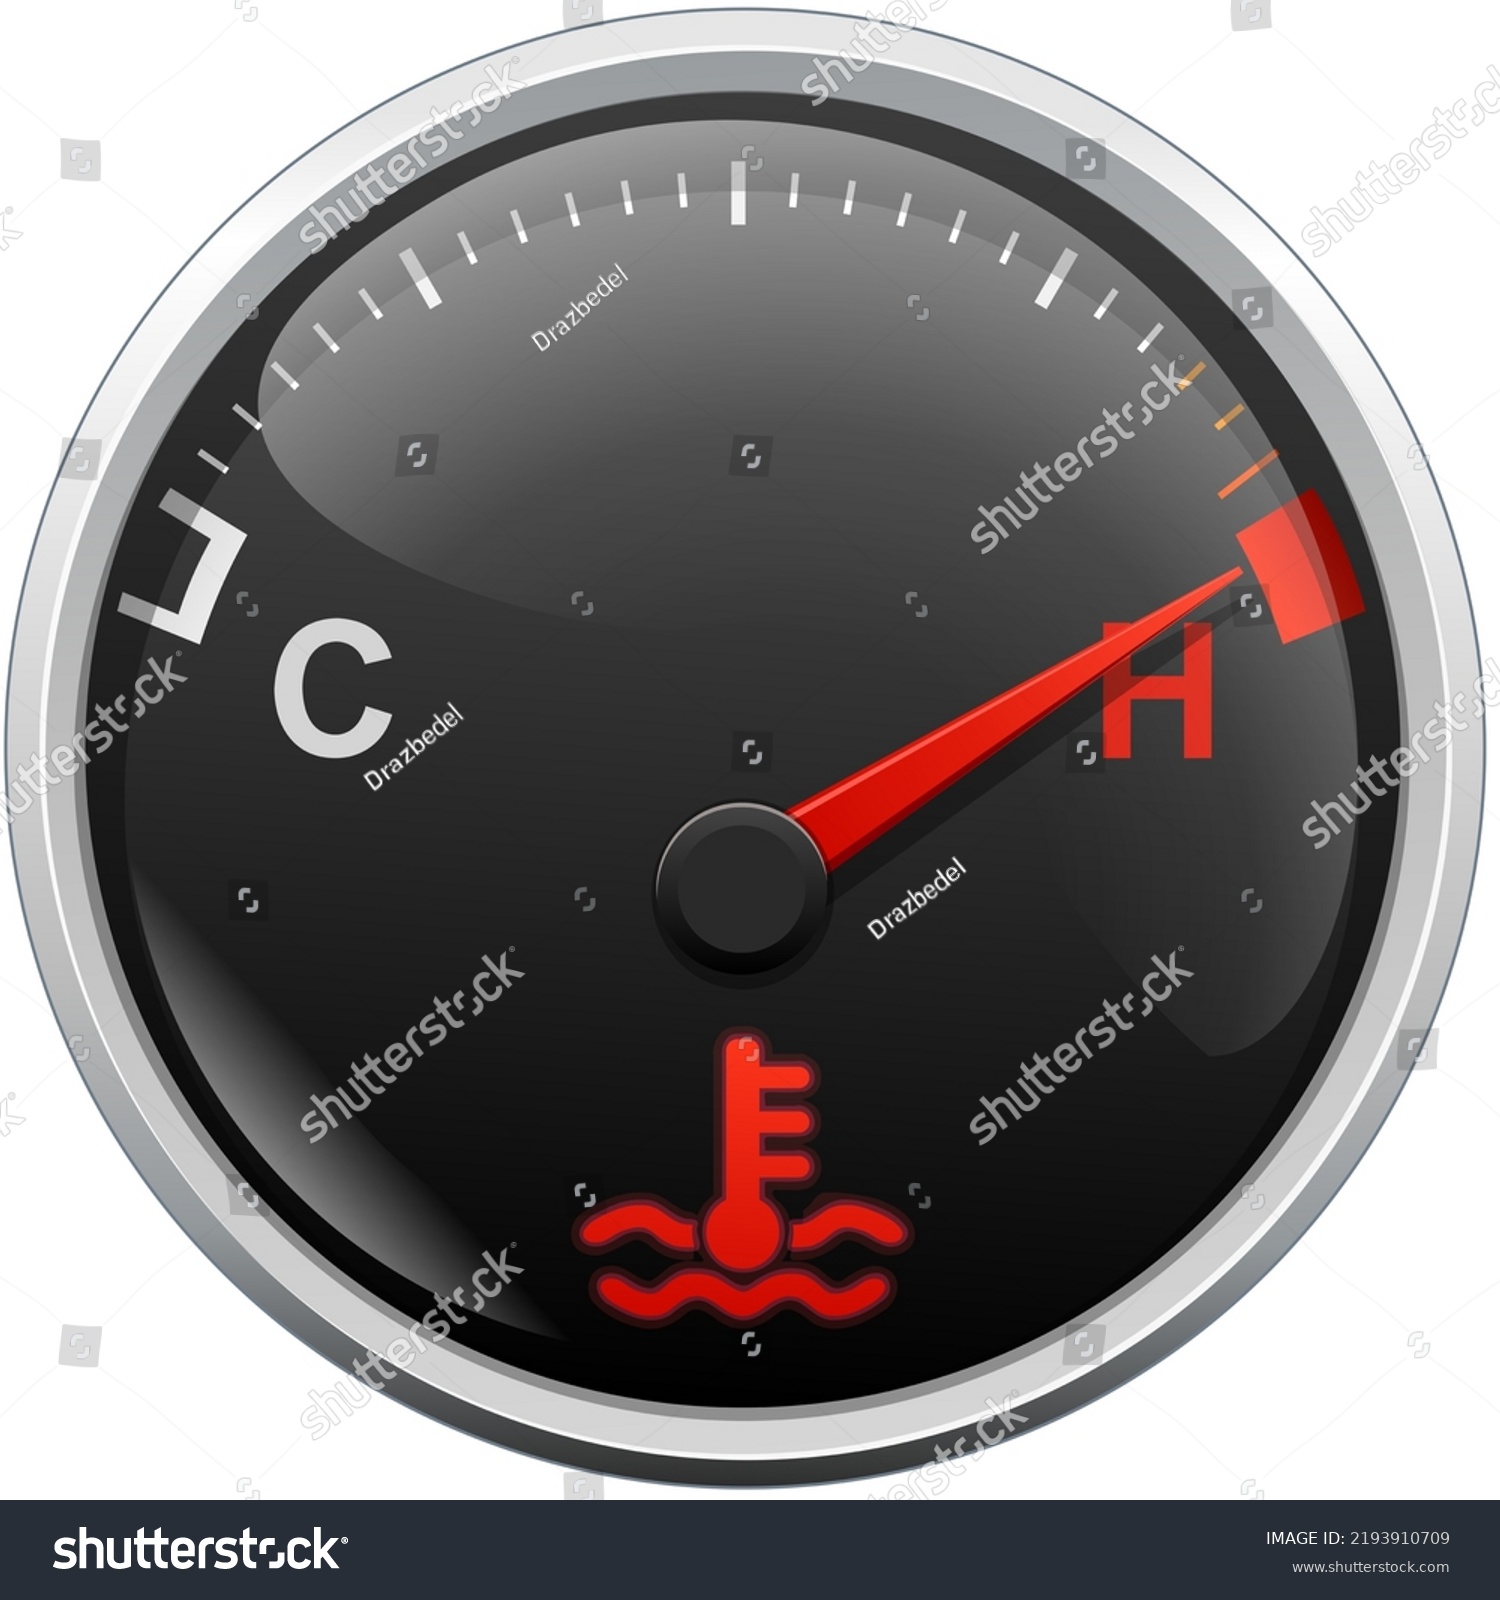 SVG of Circular gauge with a black background and white marking with a red needle indicating overheating of a vehicle's engine, the warning light with the symbol of overheated oil is illuminated in red svg